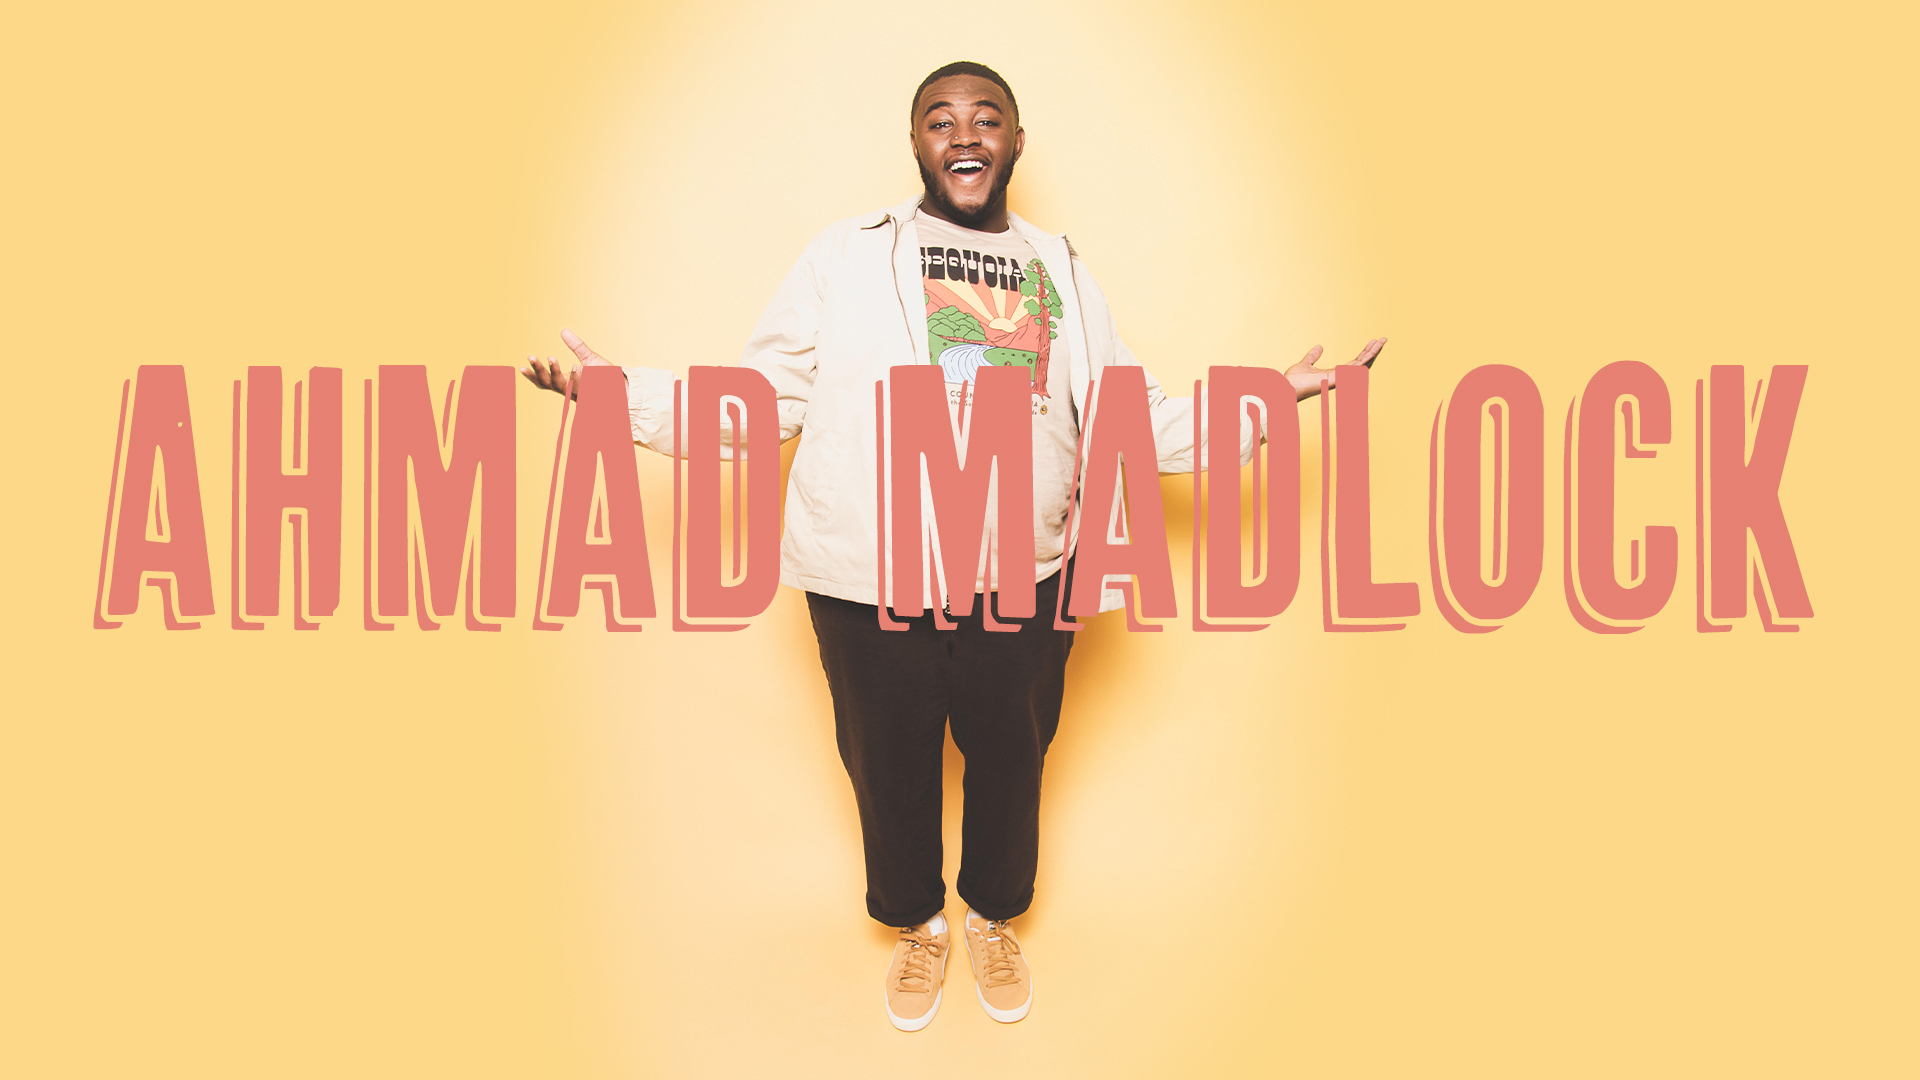 Ahmad Madlock with hands outstretched. Red text reads "Ahmad Madlock"